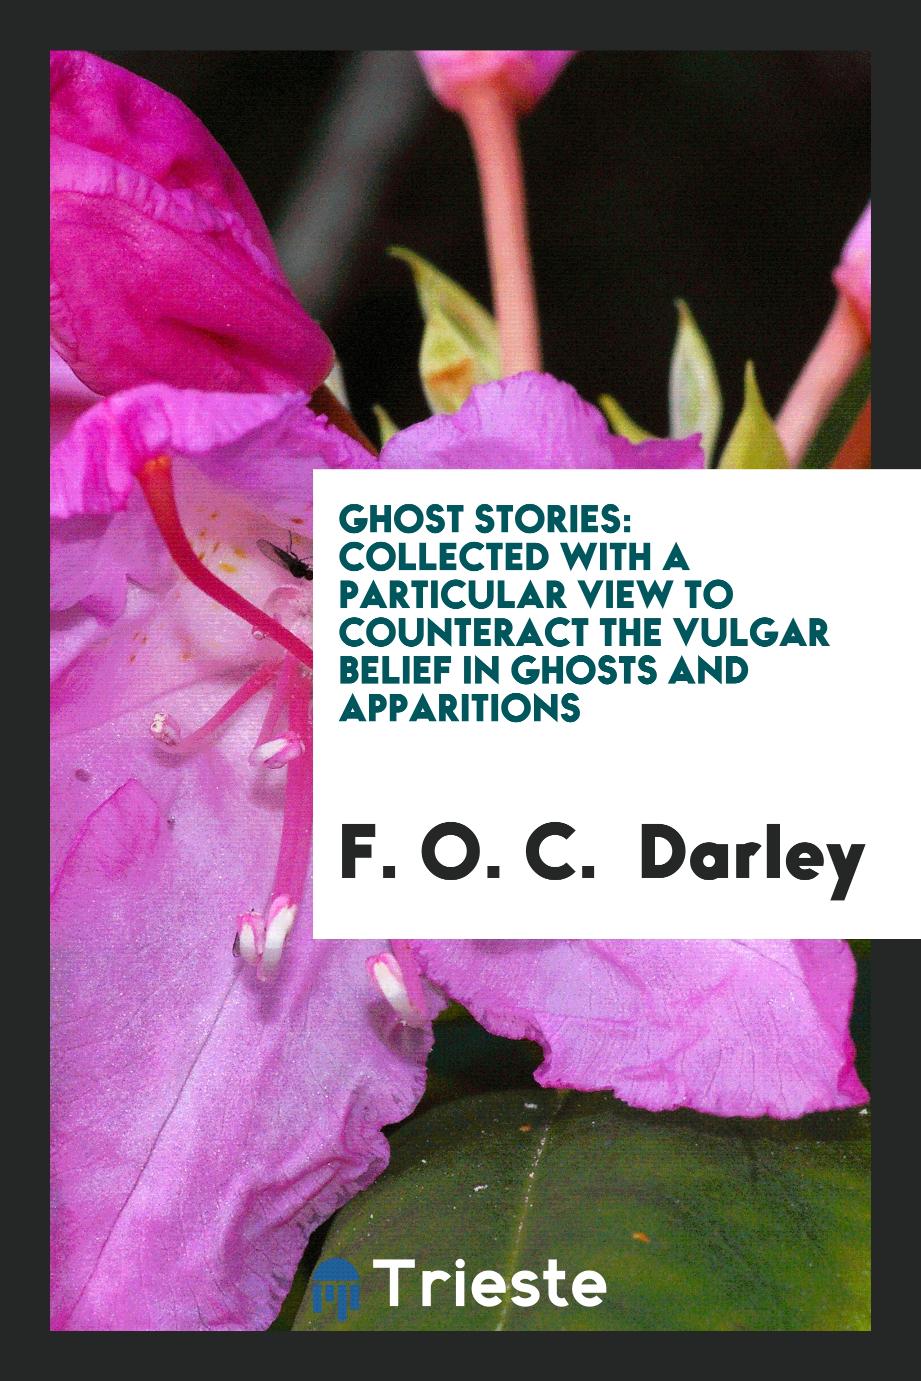 Ghost Stories: Collected with a Particular View to Counteract the Vulgar Belief in Ghosts and Apparitions